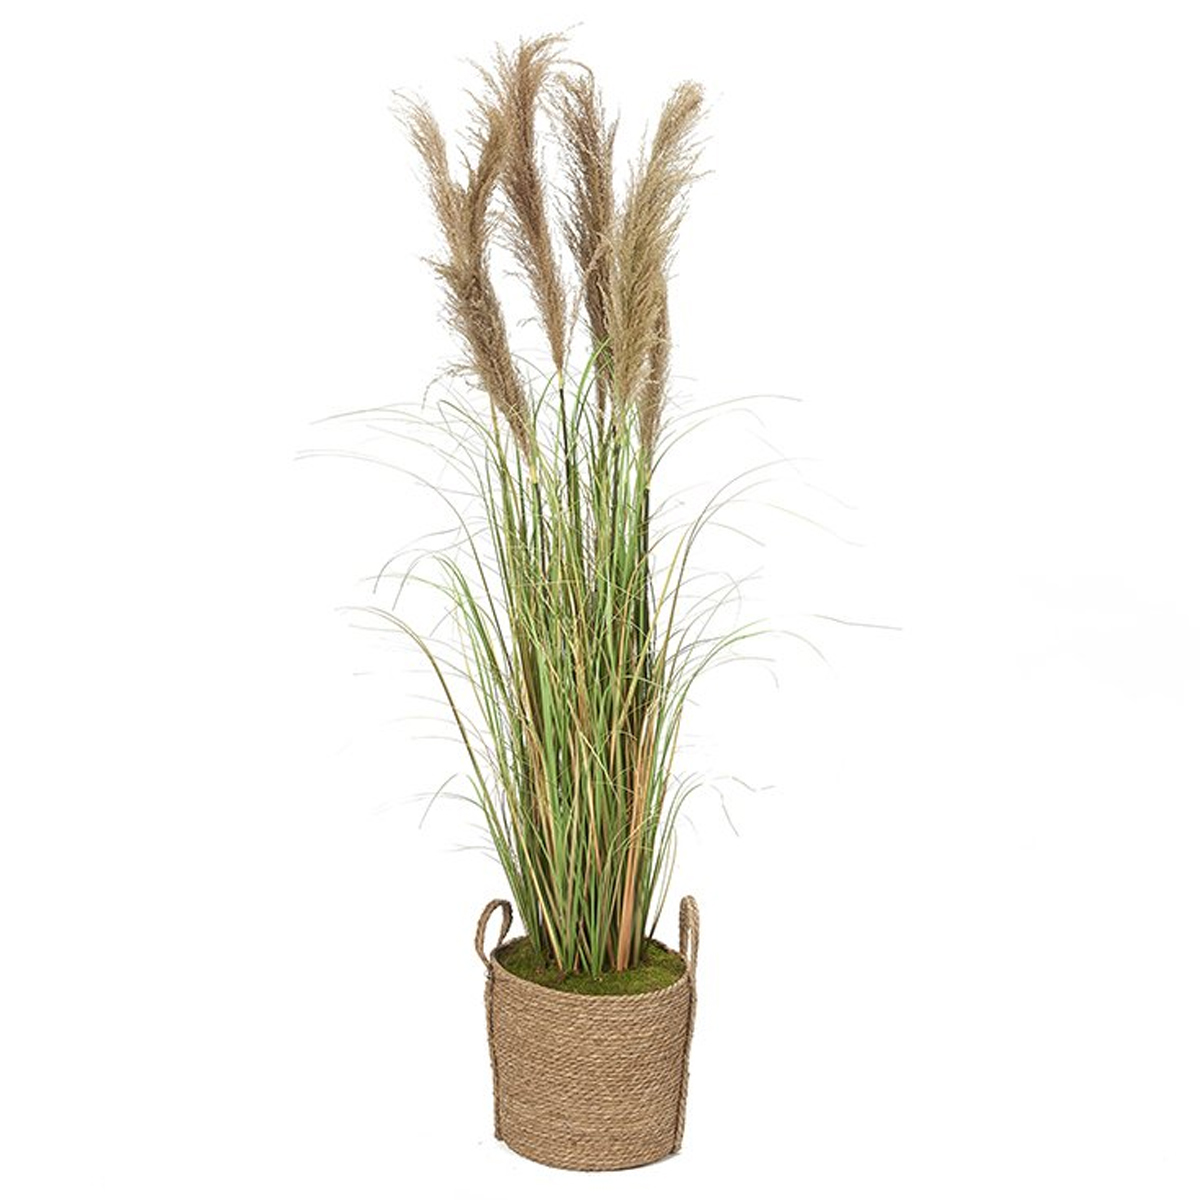 Picture of 6' REED GRASS IN ROUND NATURAL PLANTER